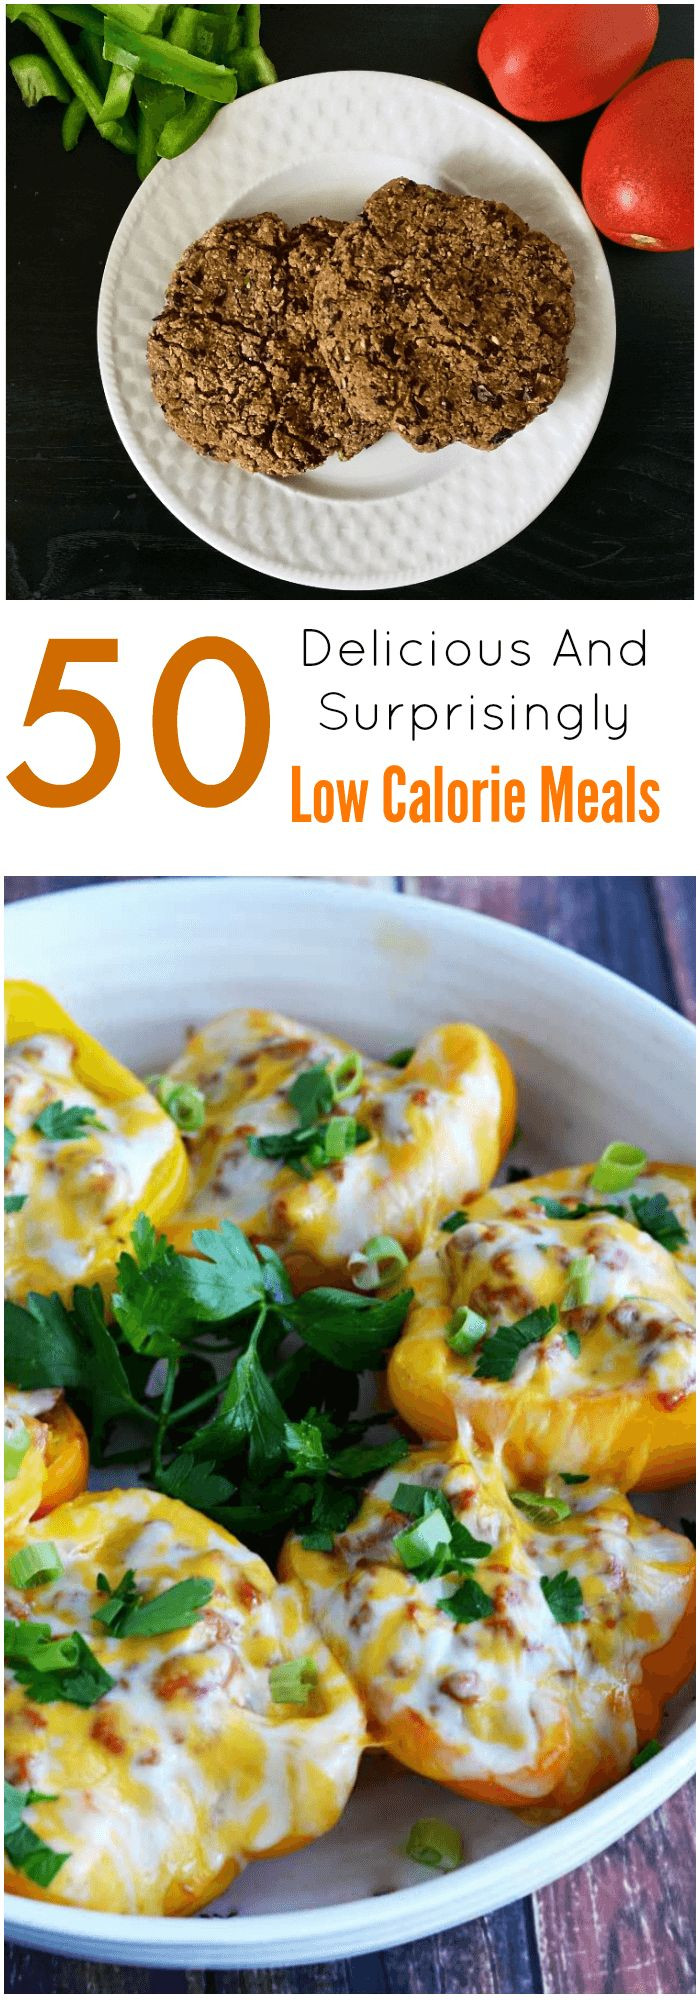 Very Low Calorie Recipes
 50 Delicious And Surprisingly Low Calorie Meals